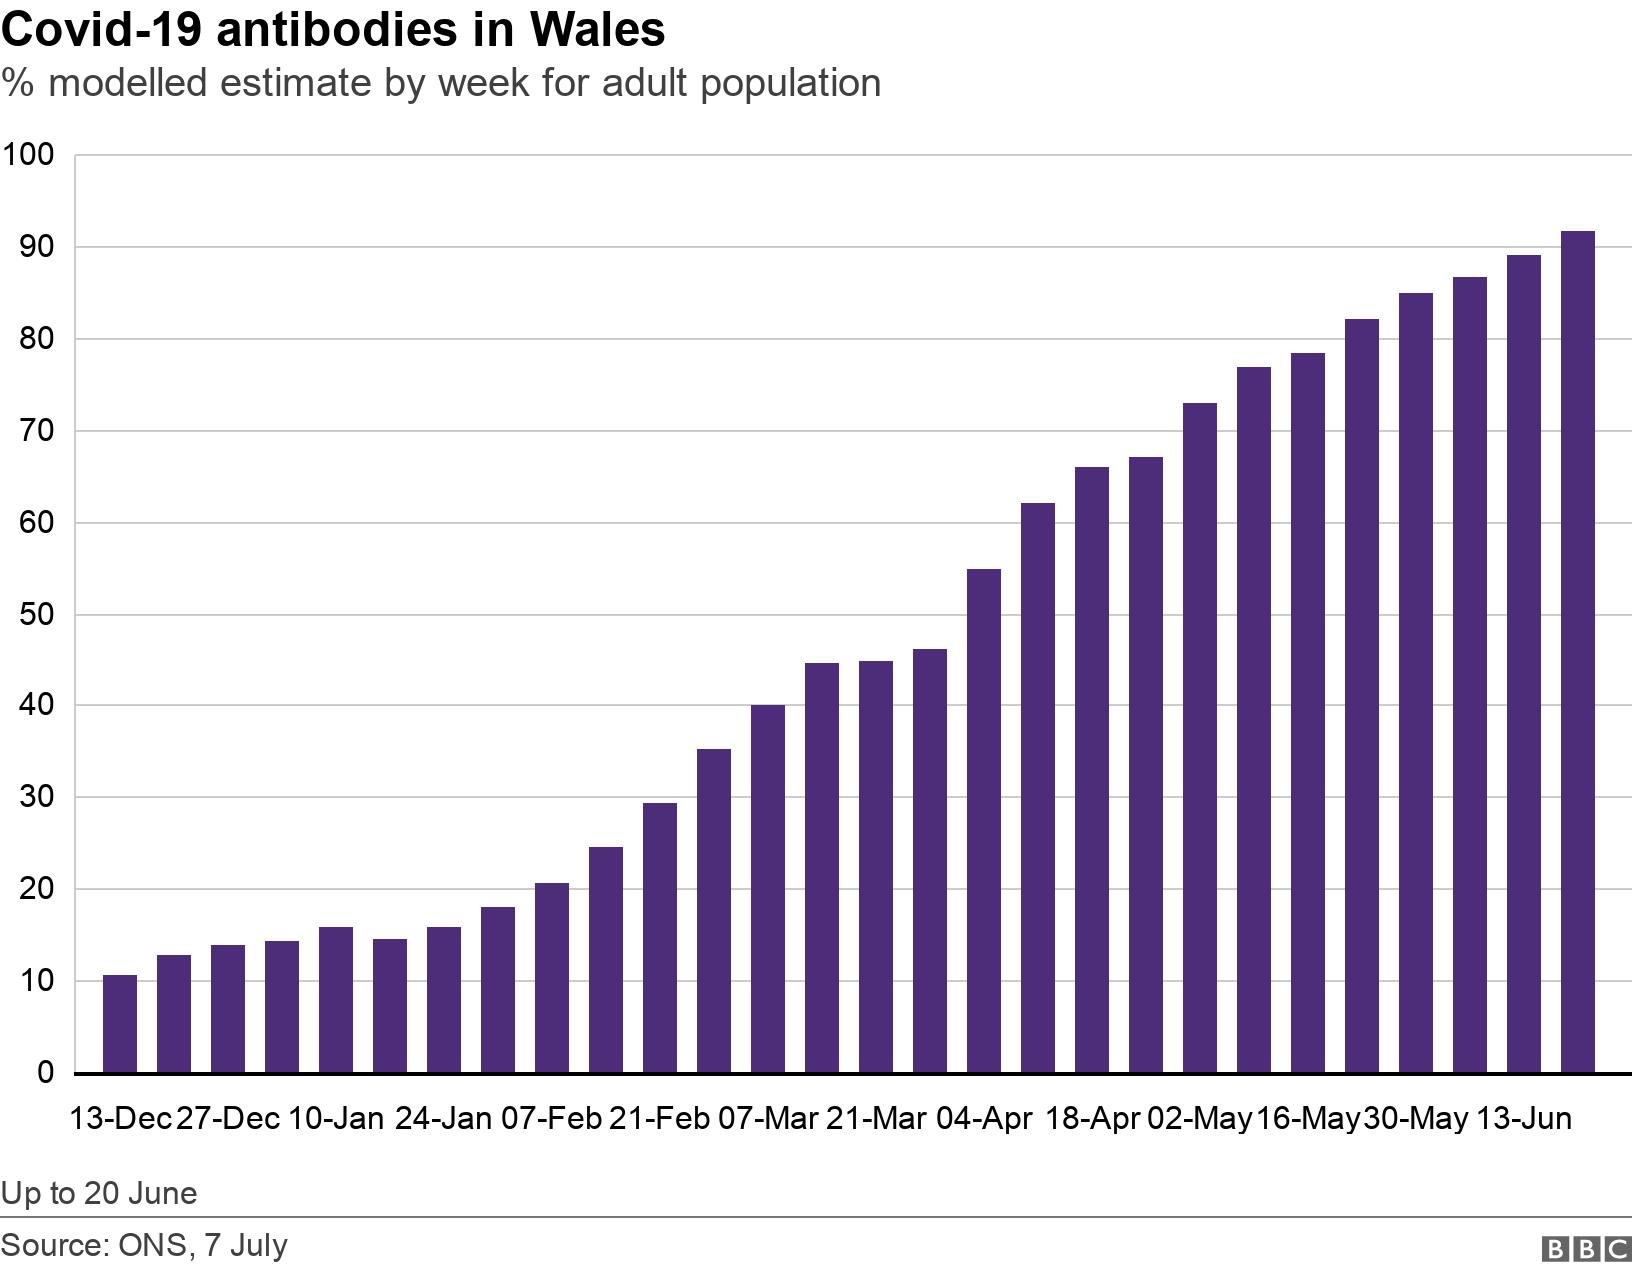 Covid-19 antibodies in Wales. % modelled estimate by week for adult population.  Up to 20 June.